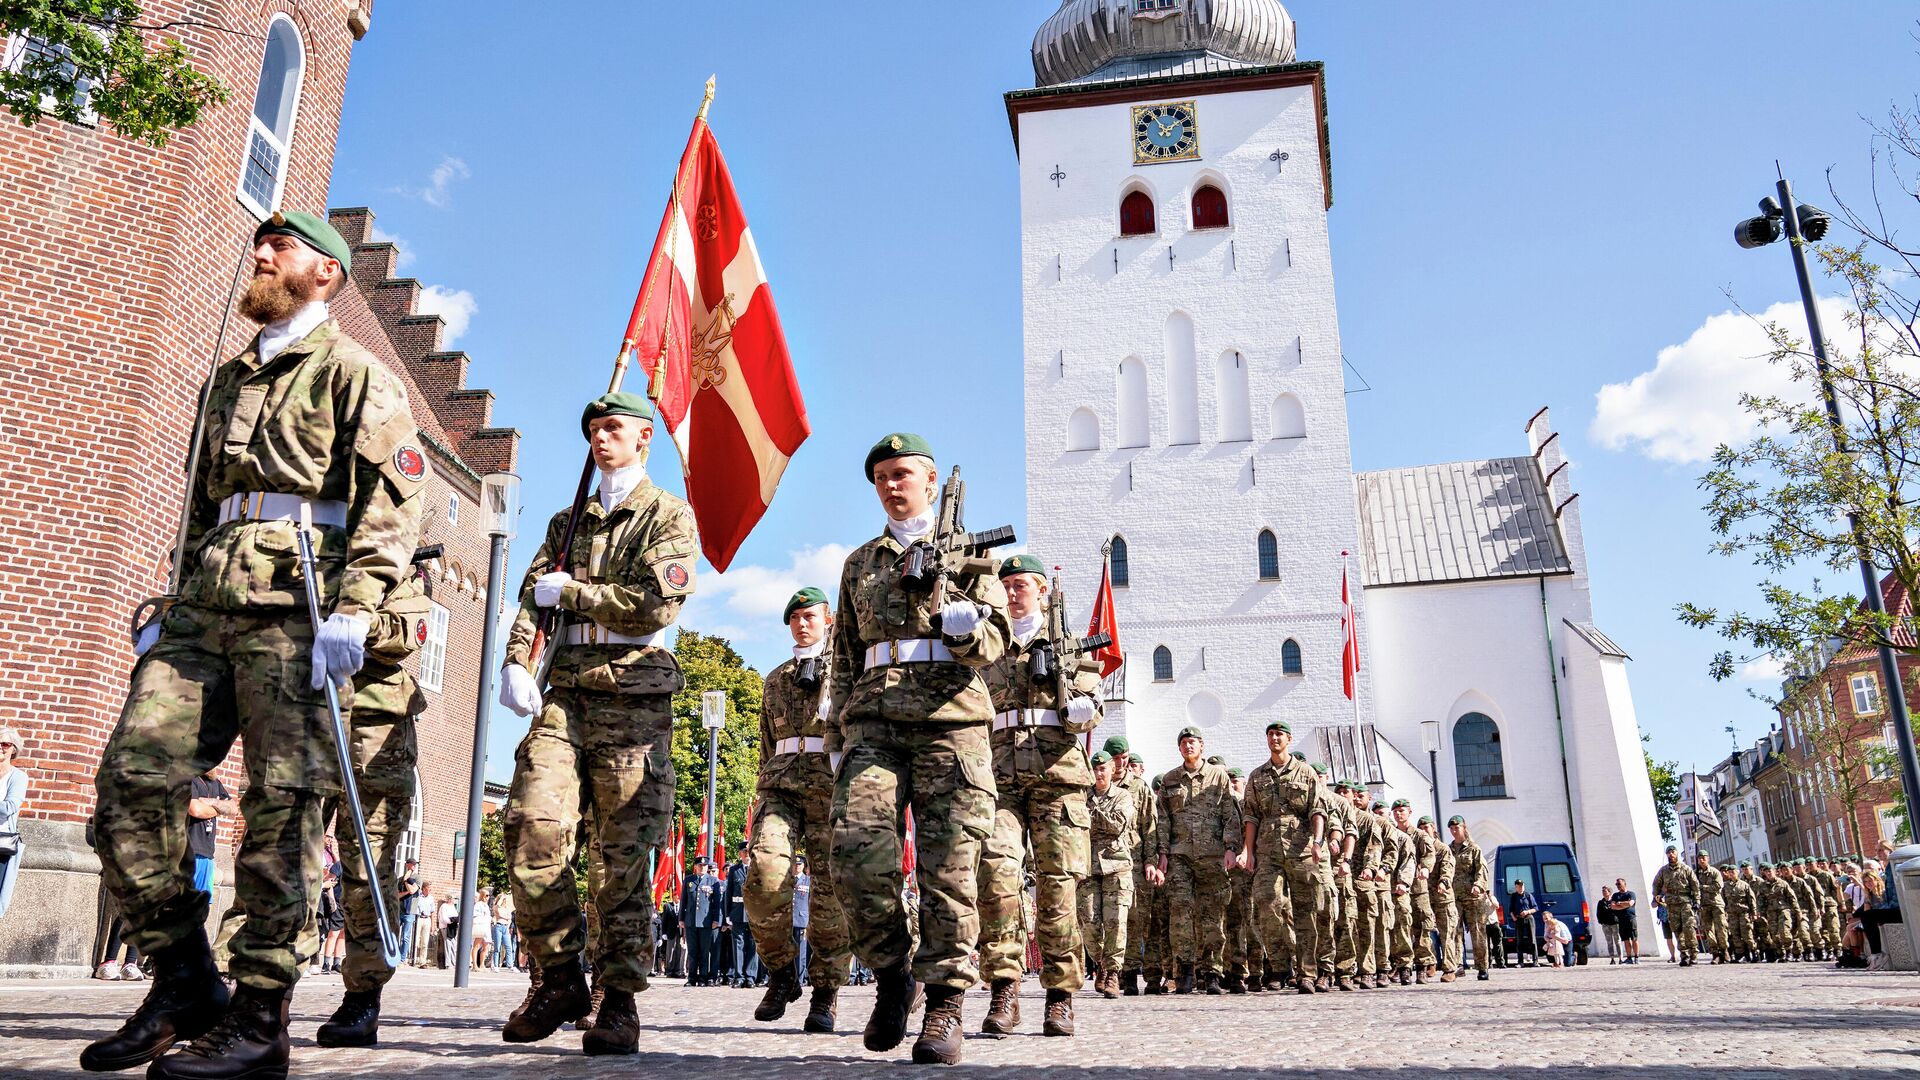 Soldiers carry the Danish flag (Dannebrog) as they parade through the city of Aalborg, Denmark, during the Flag Day for Denmark's emissaries, on September 5, 2021 - Sputnik International, 1920, 10.02.2022